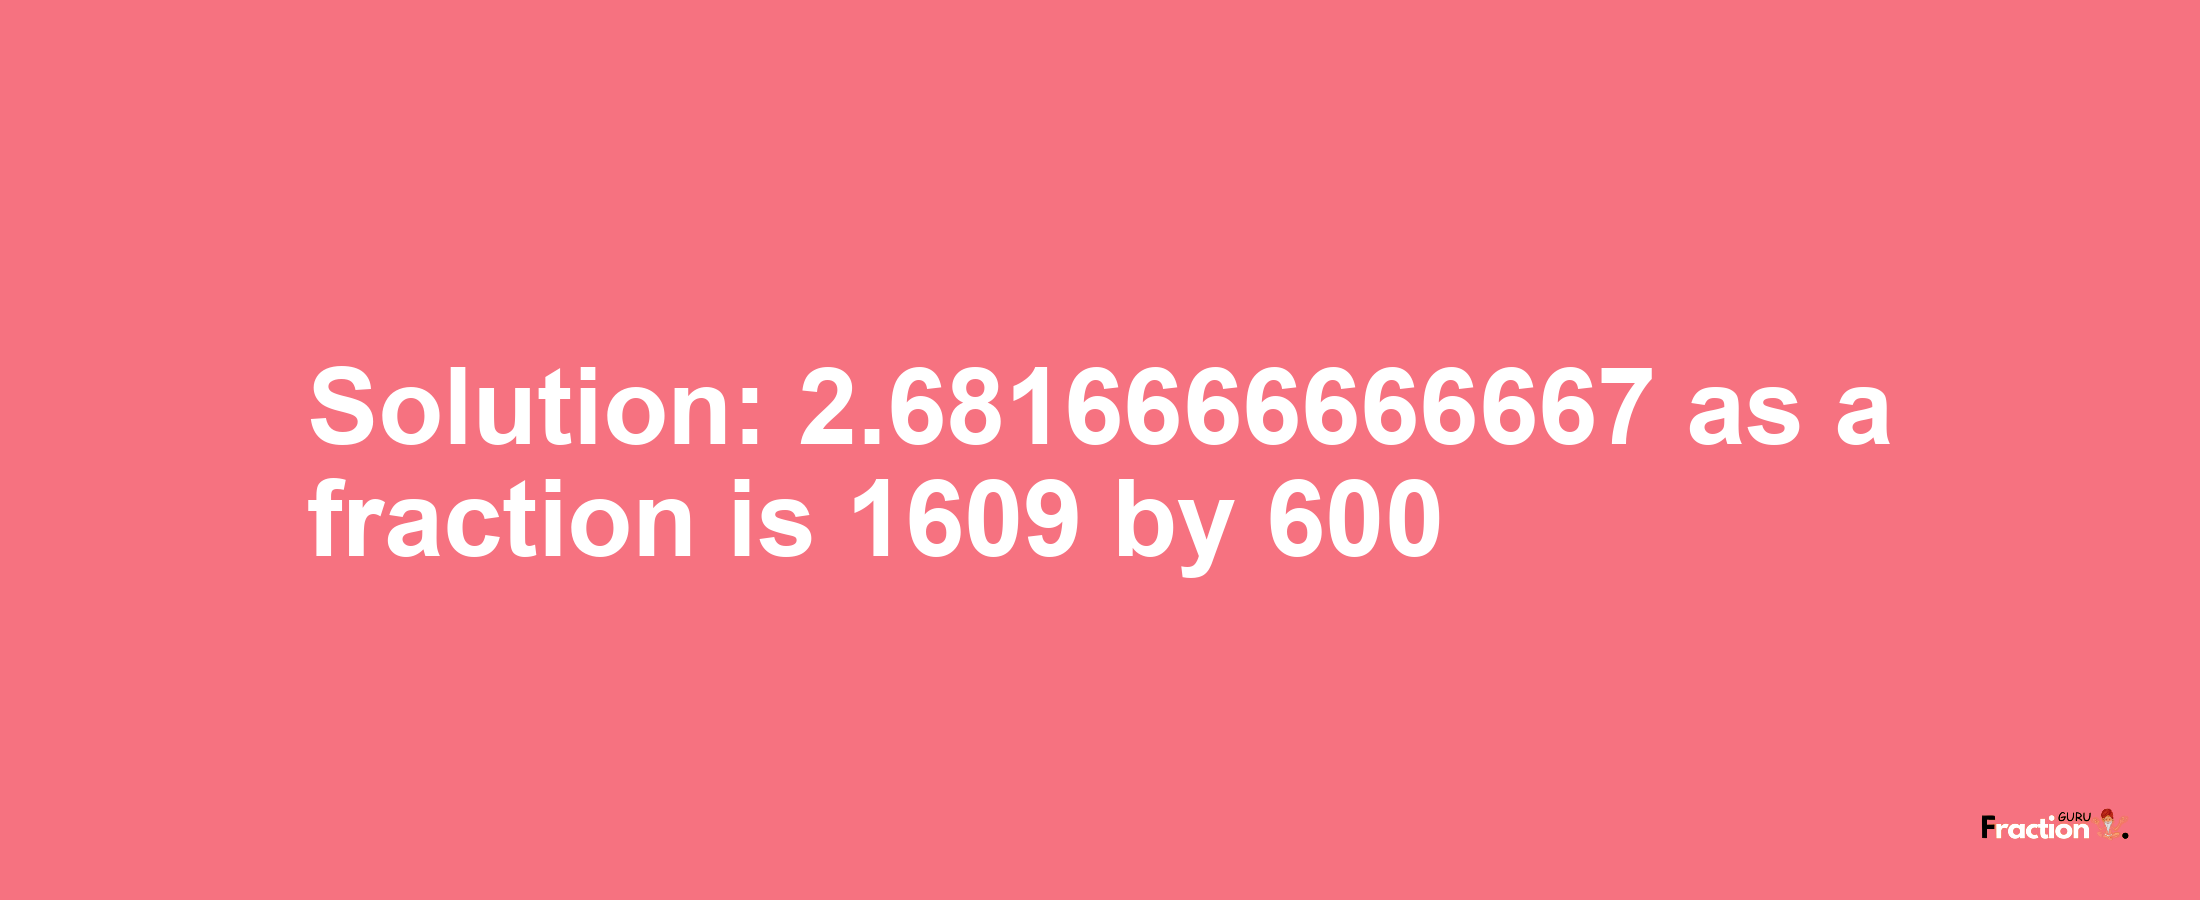 Solution:2.6816666666667 as a fraction is 1609/600